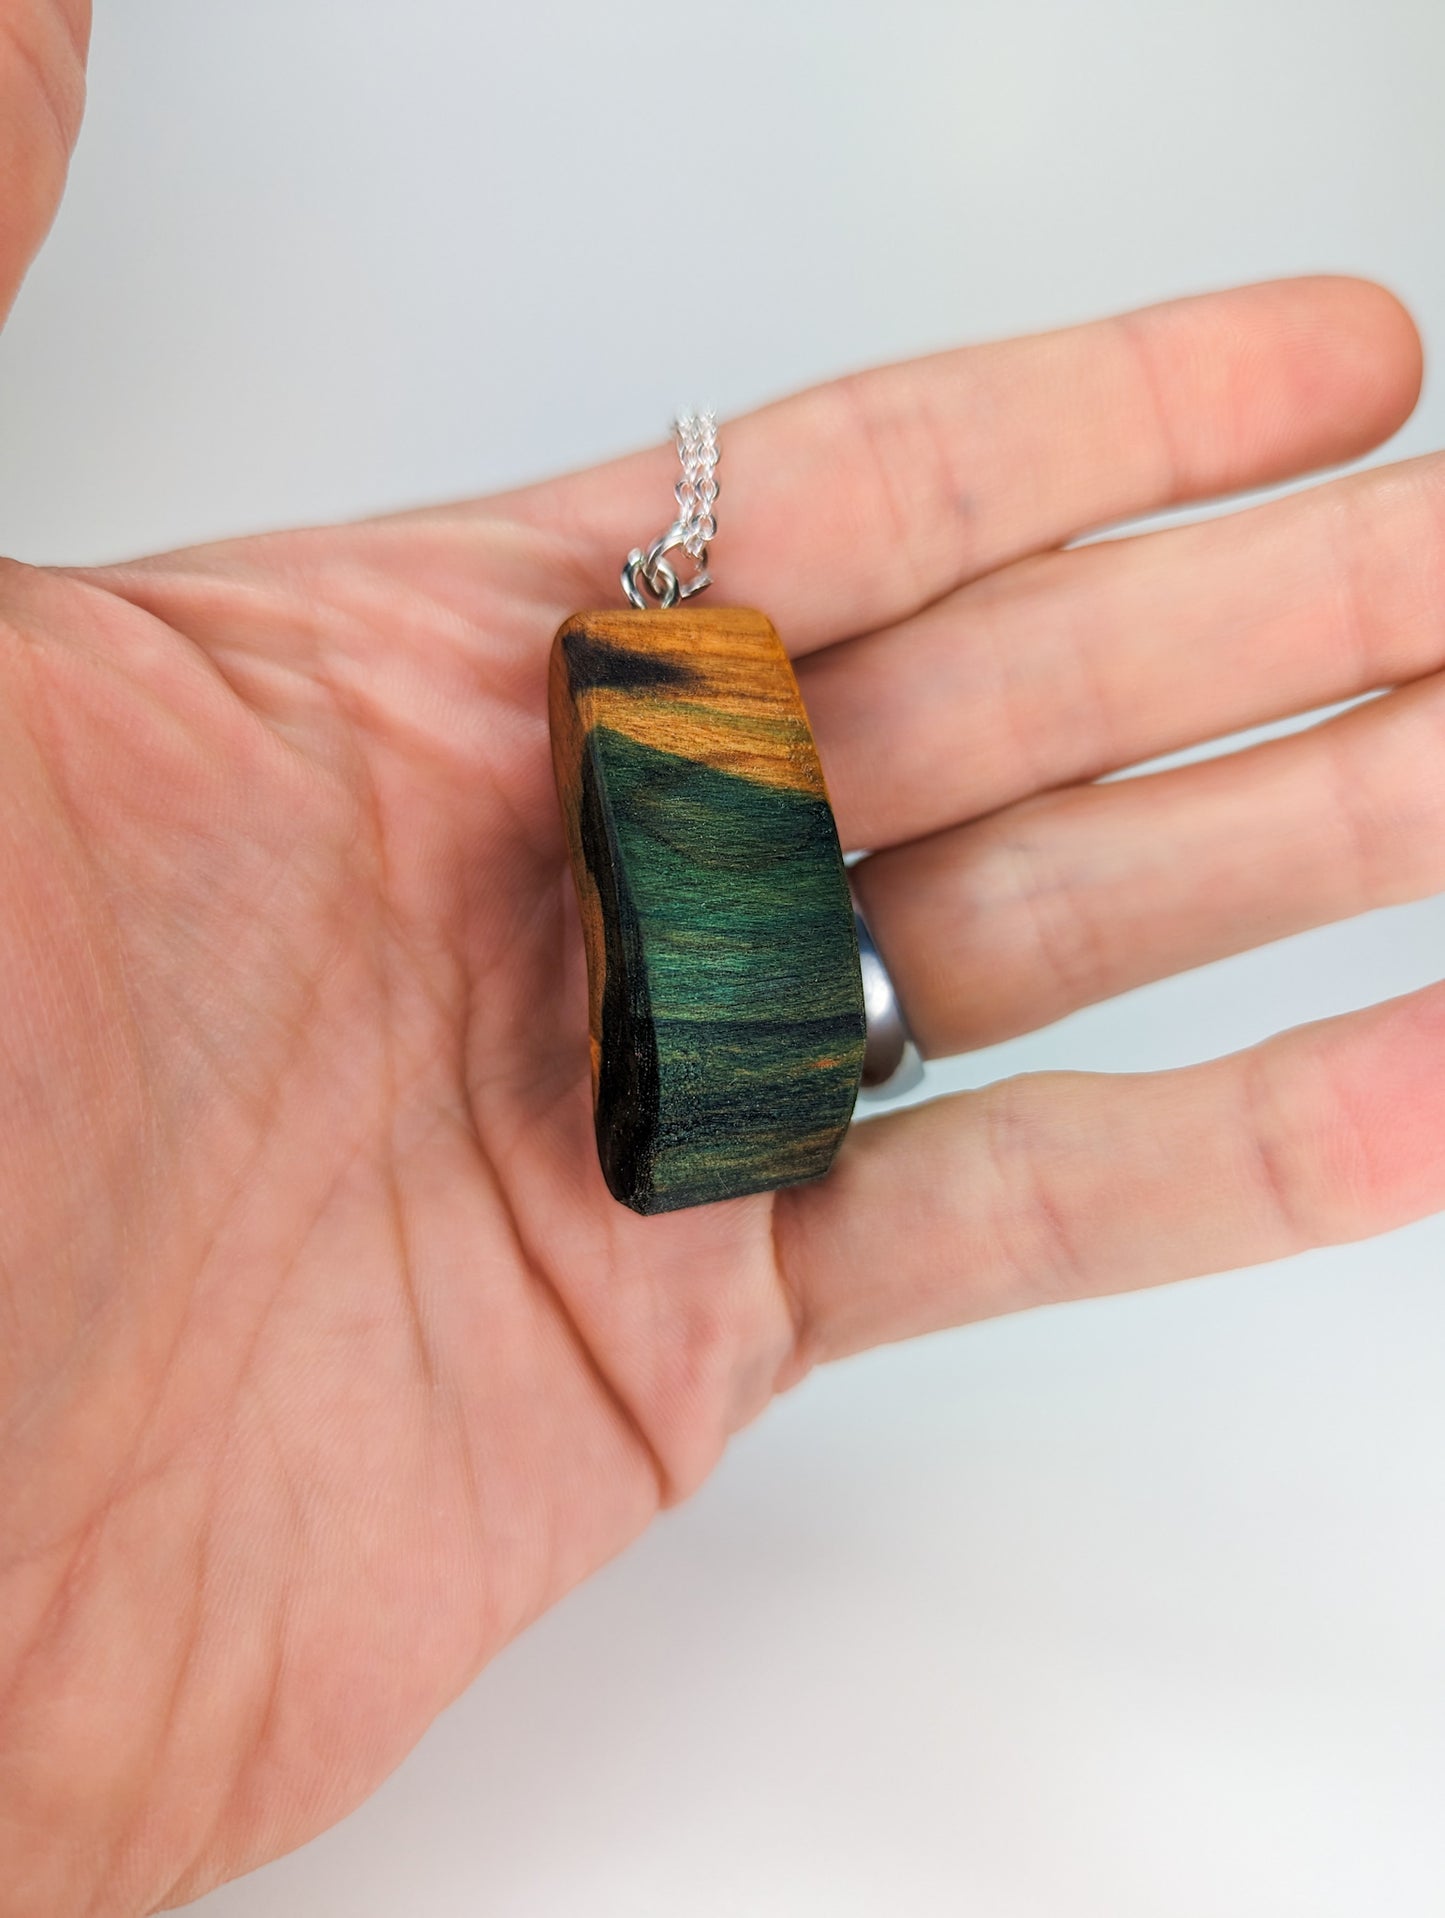 Naturally Fungus-Stained Wooden Pendant - Abstract Bean